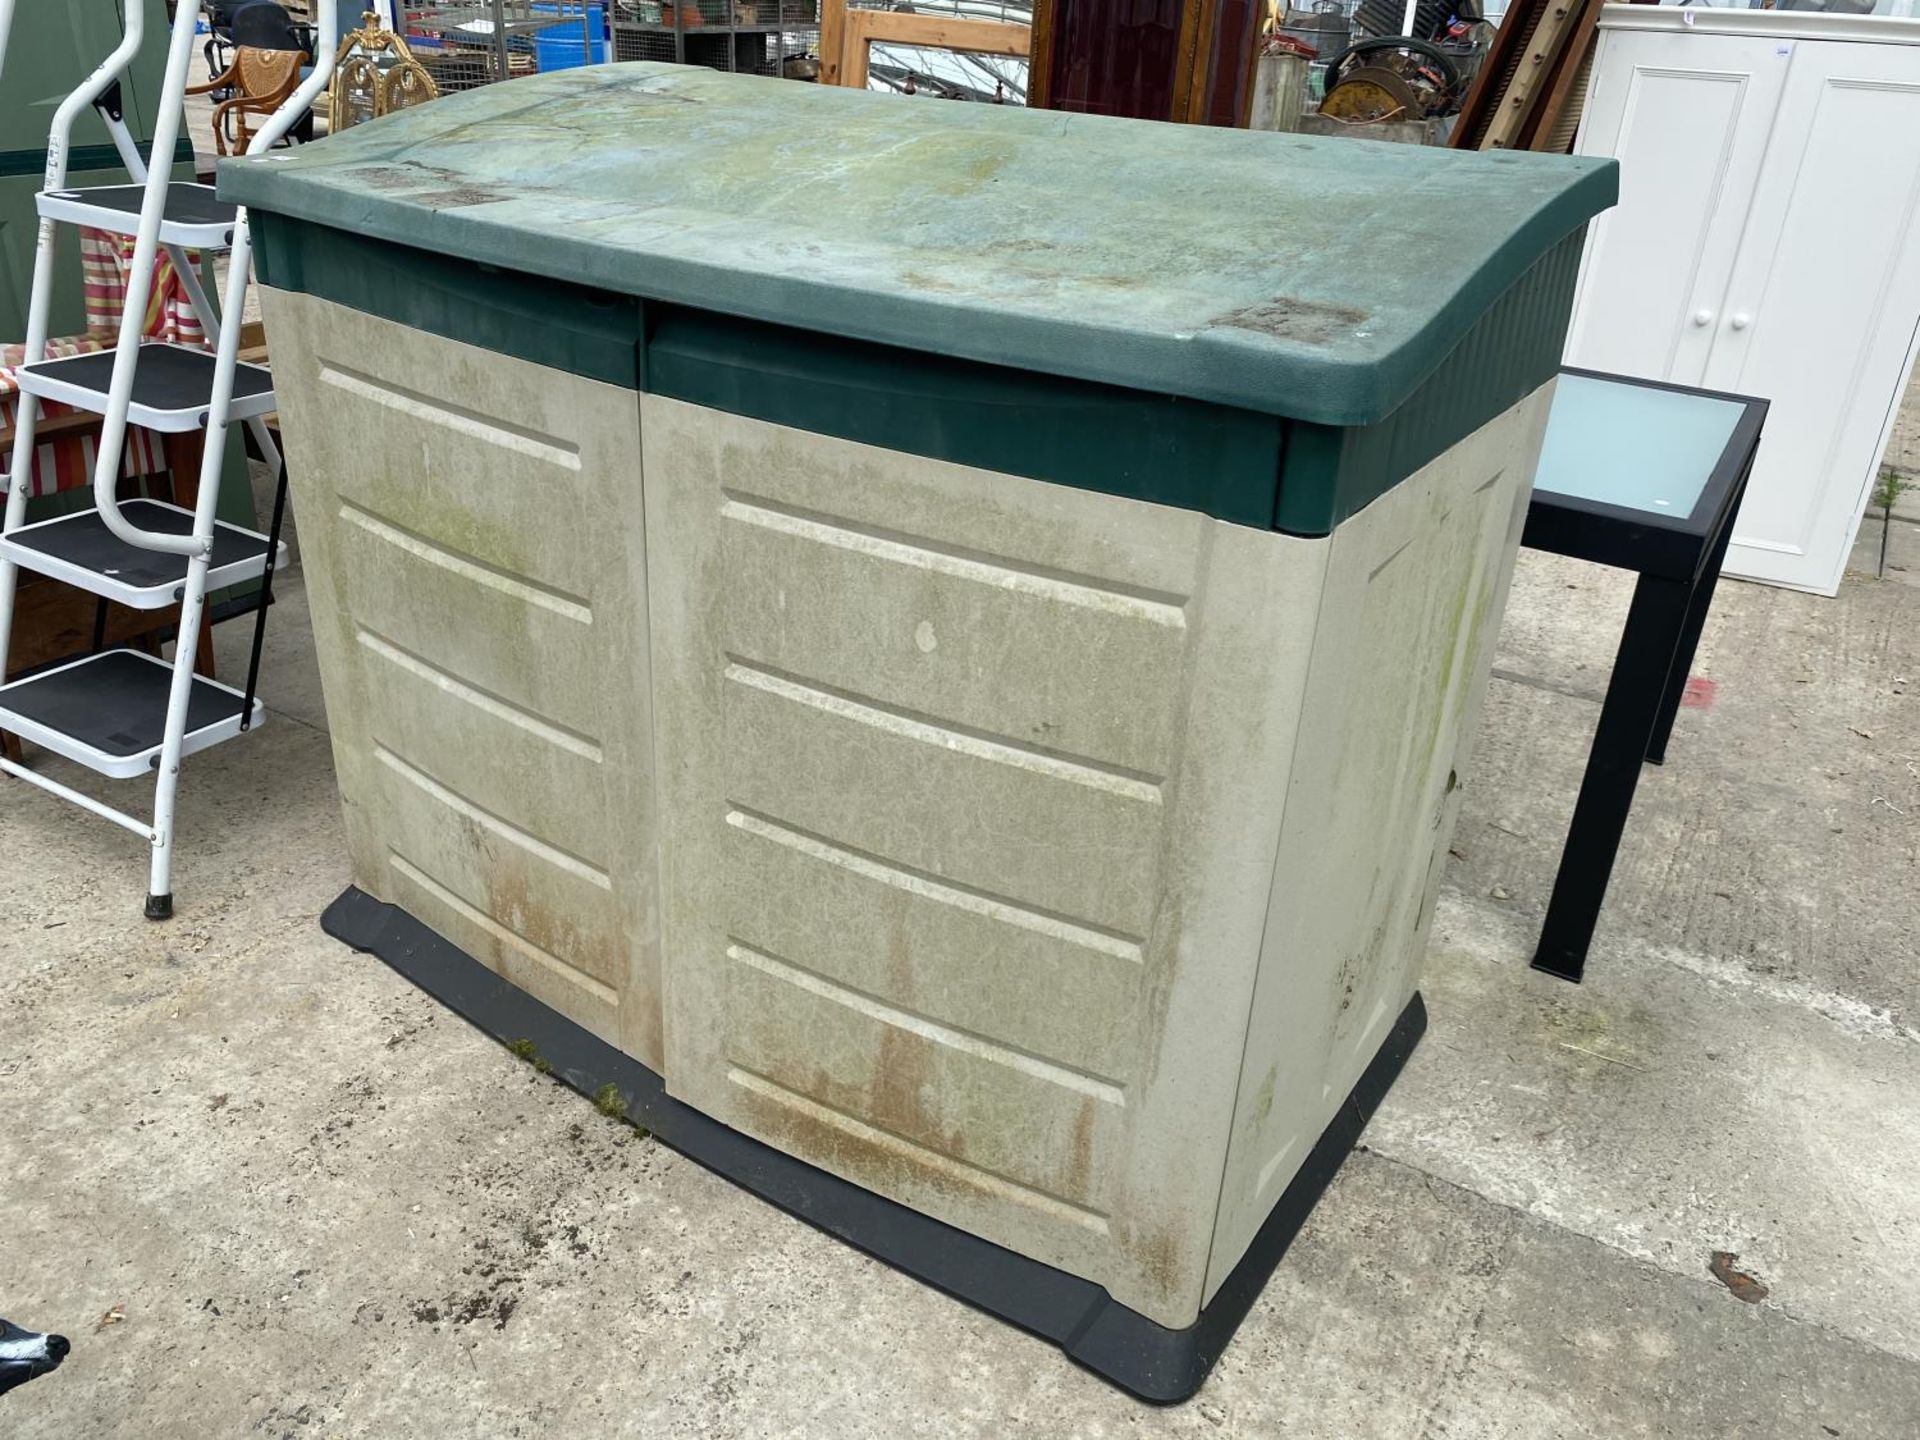 TWO PLASTIC GARDEN STORAGE SHEDS, A SET OF KITCHEN STEPS AND TWO DIRECTORS CHAIRS